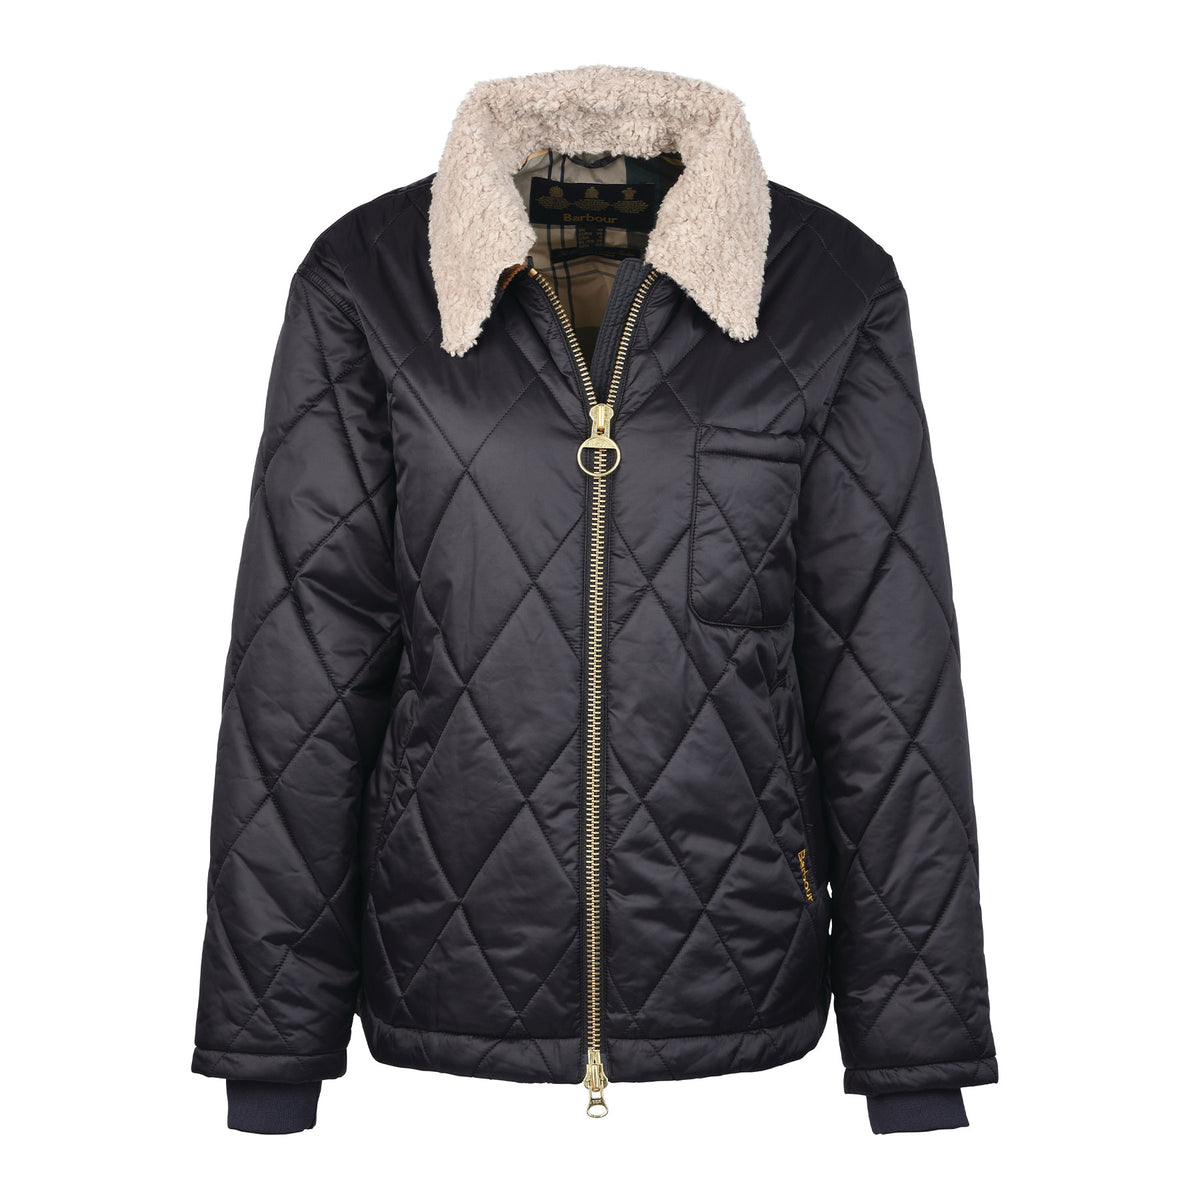 Hero image featuring the Barbour Vaila Quilt jacket in black with a fleece collar and a gold zipper.